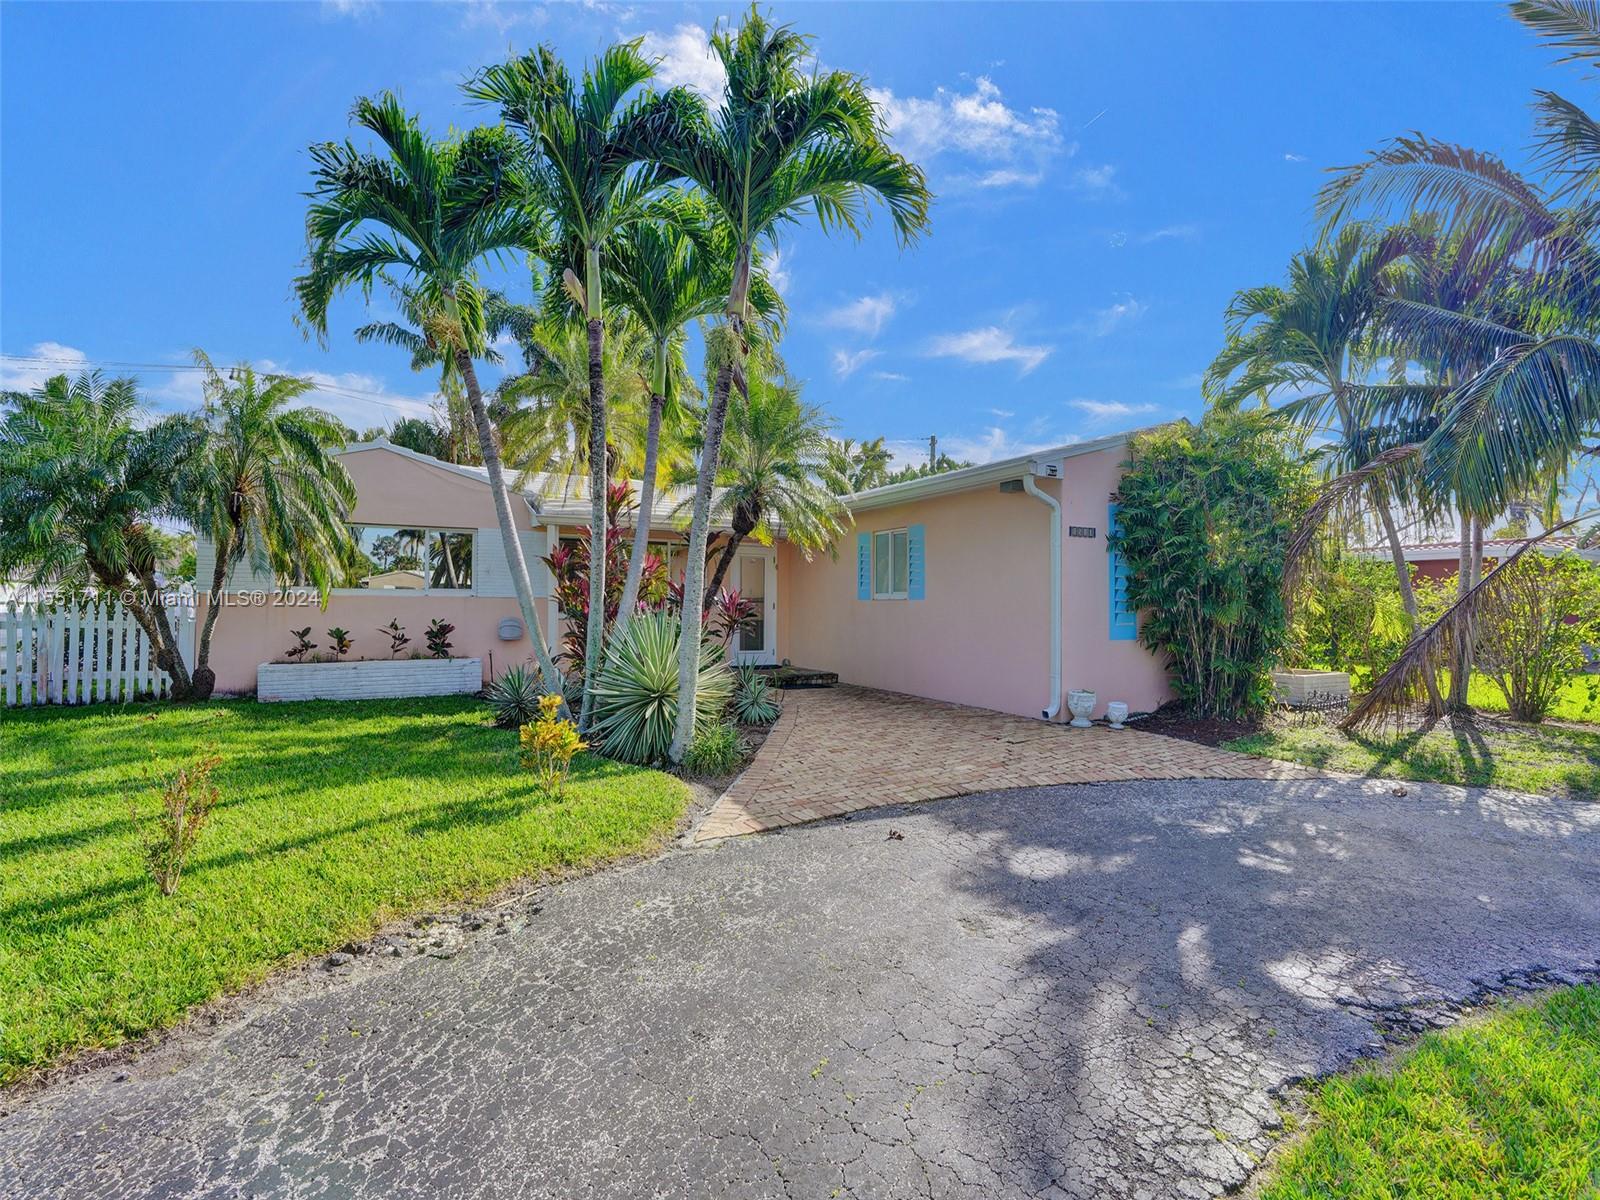 1510 Coolidge St, Hollywood, Florida, 33020, United States, 2 Bedrooms Bedrooms, ,2 BathroomsBathrooms,Residential,For Sale,1510 Coolidge St,1495077